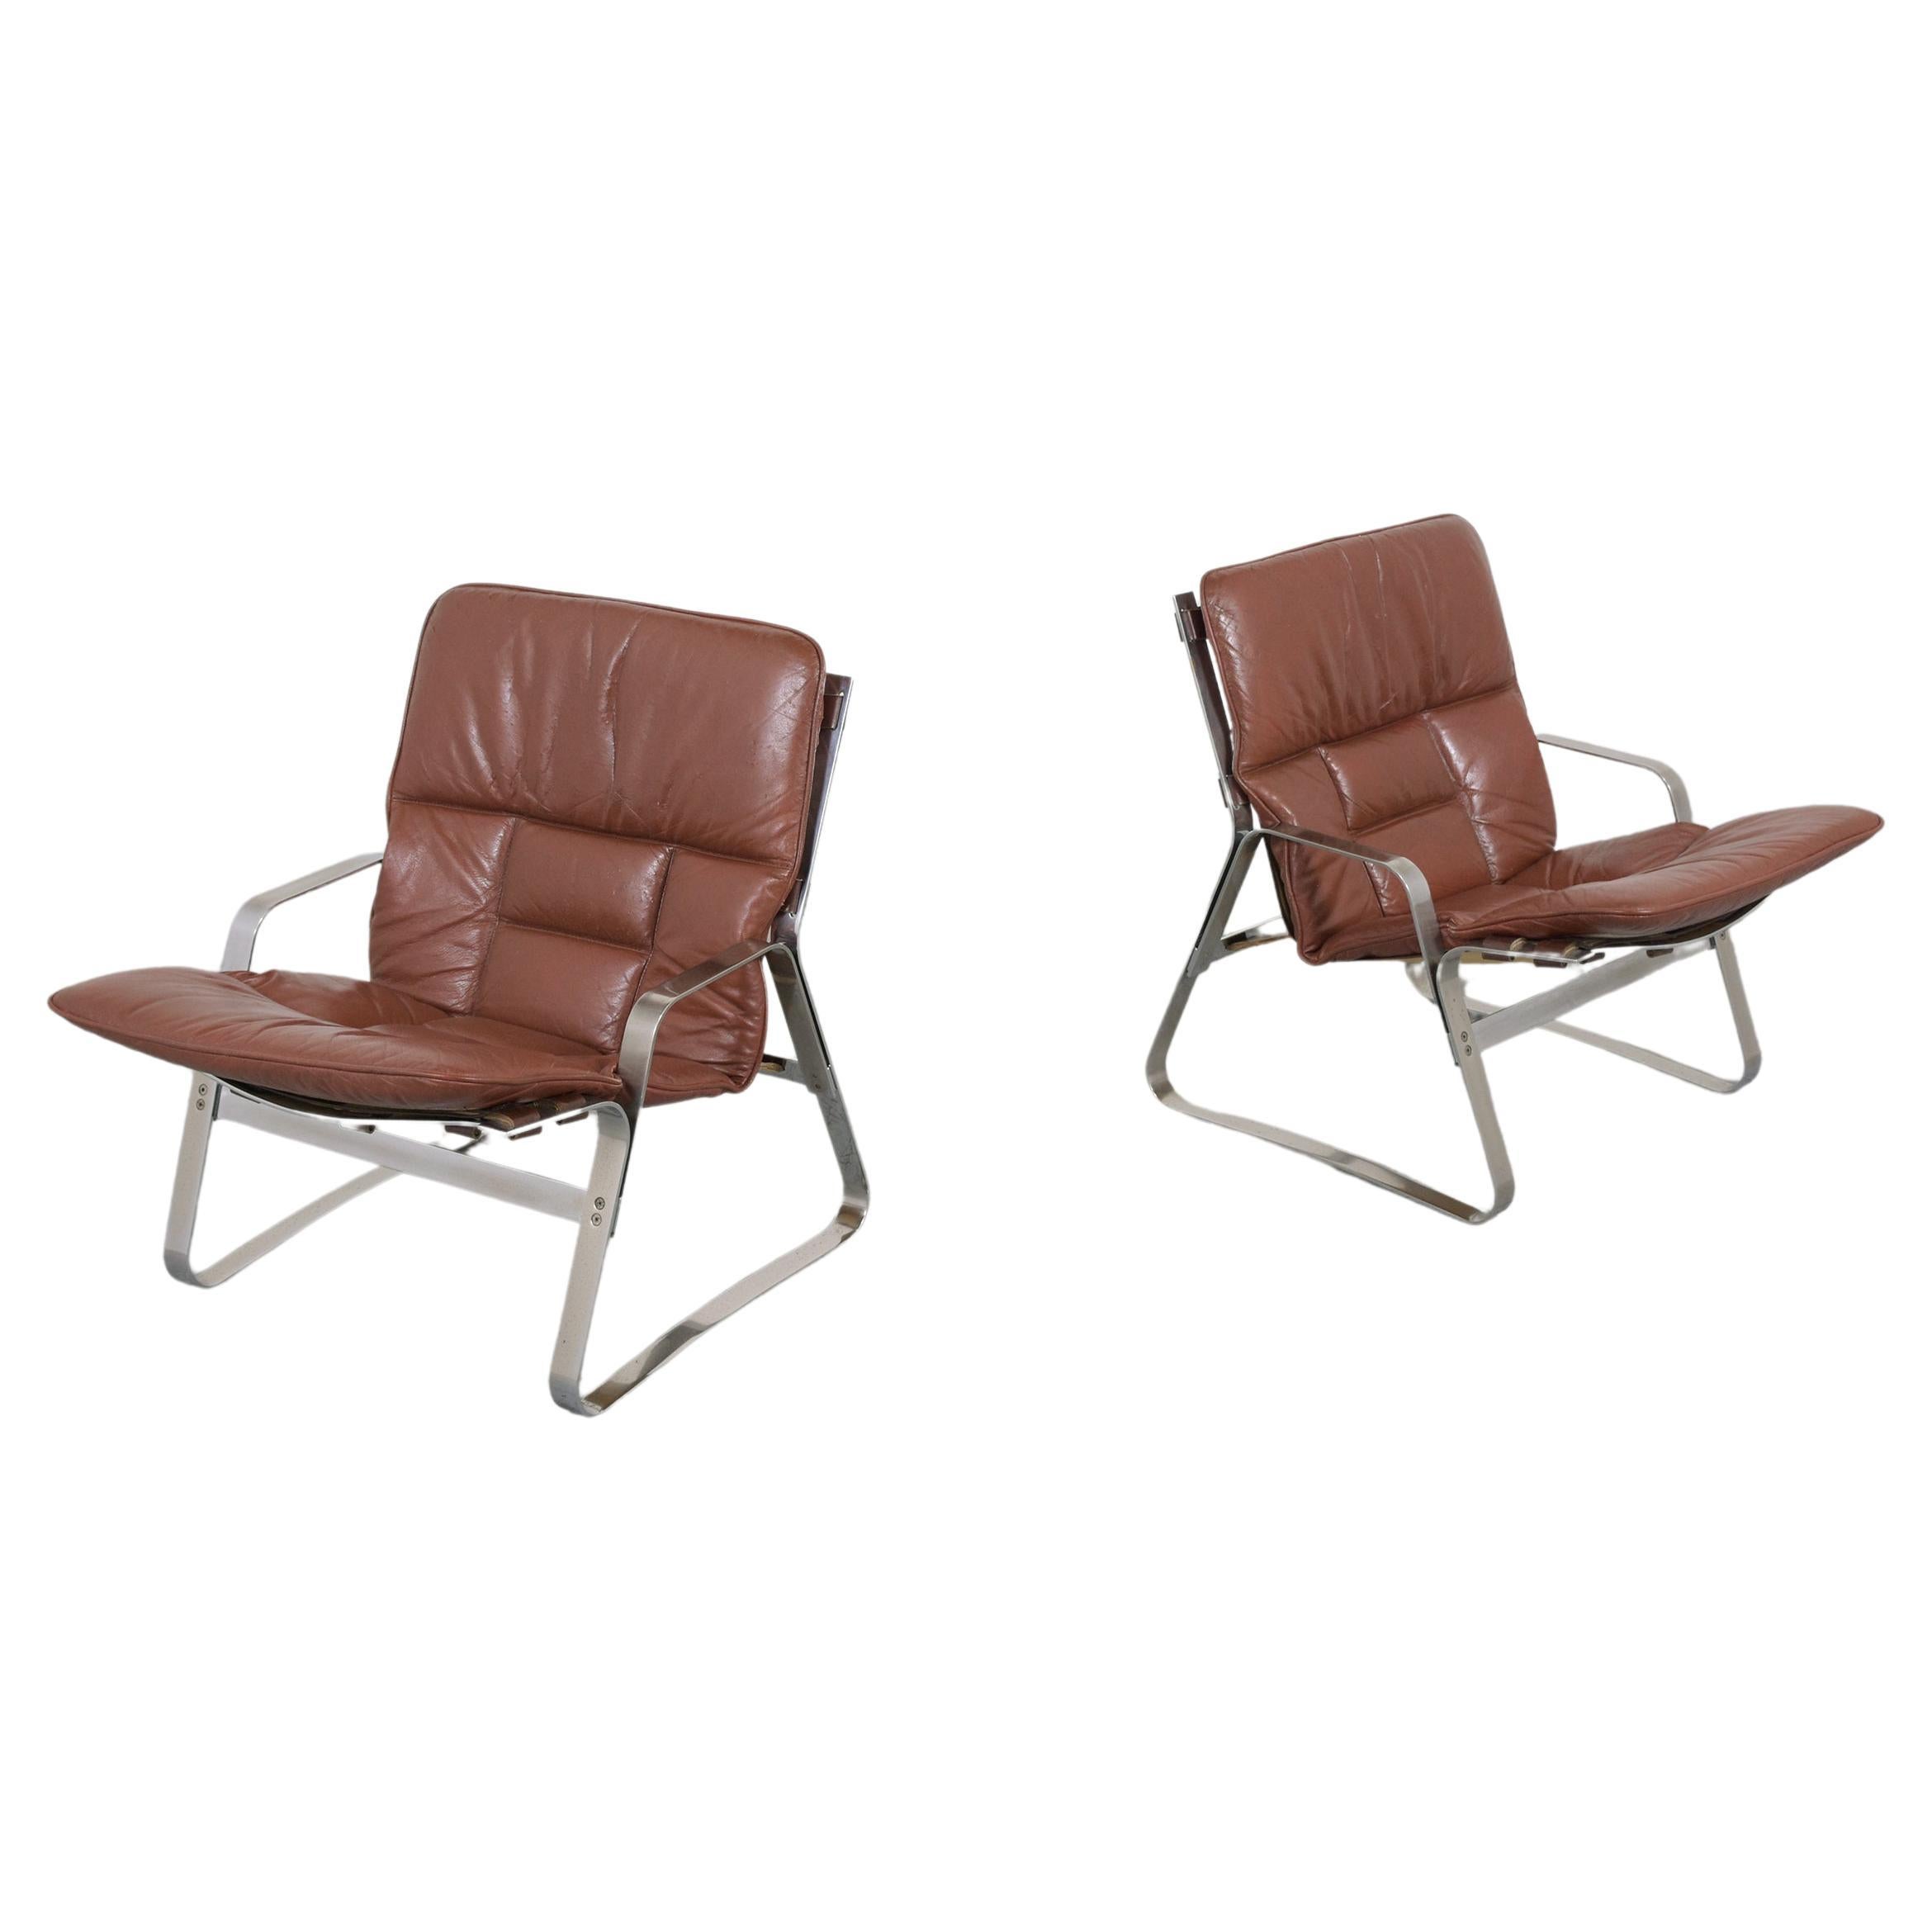 Vintage Pair of Mid Century Modern Leather Chrome Lounge Chairs